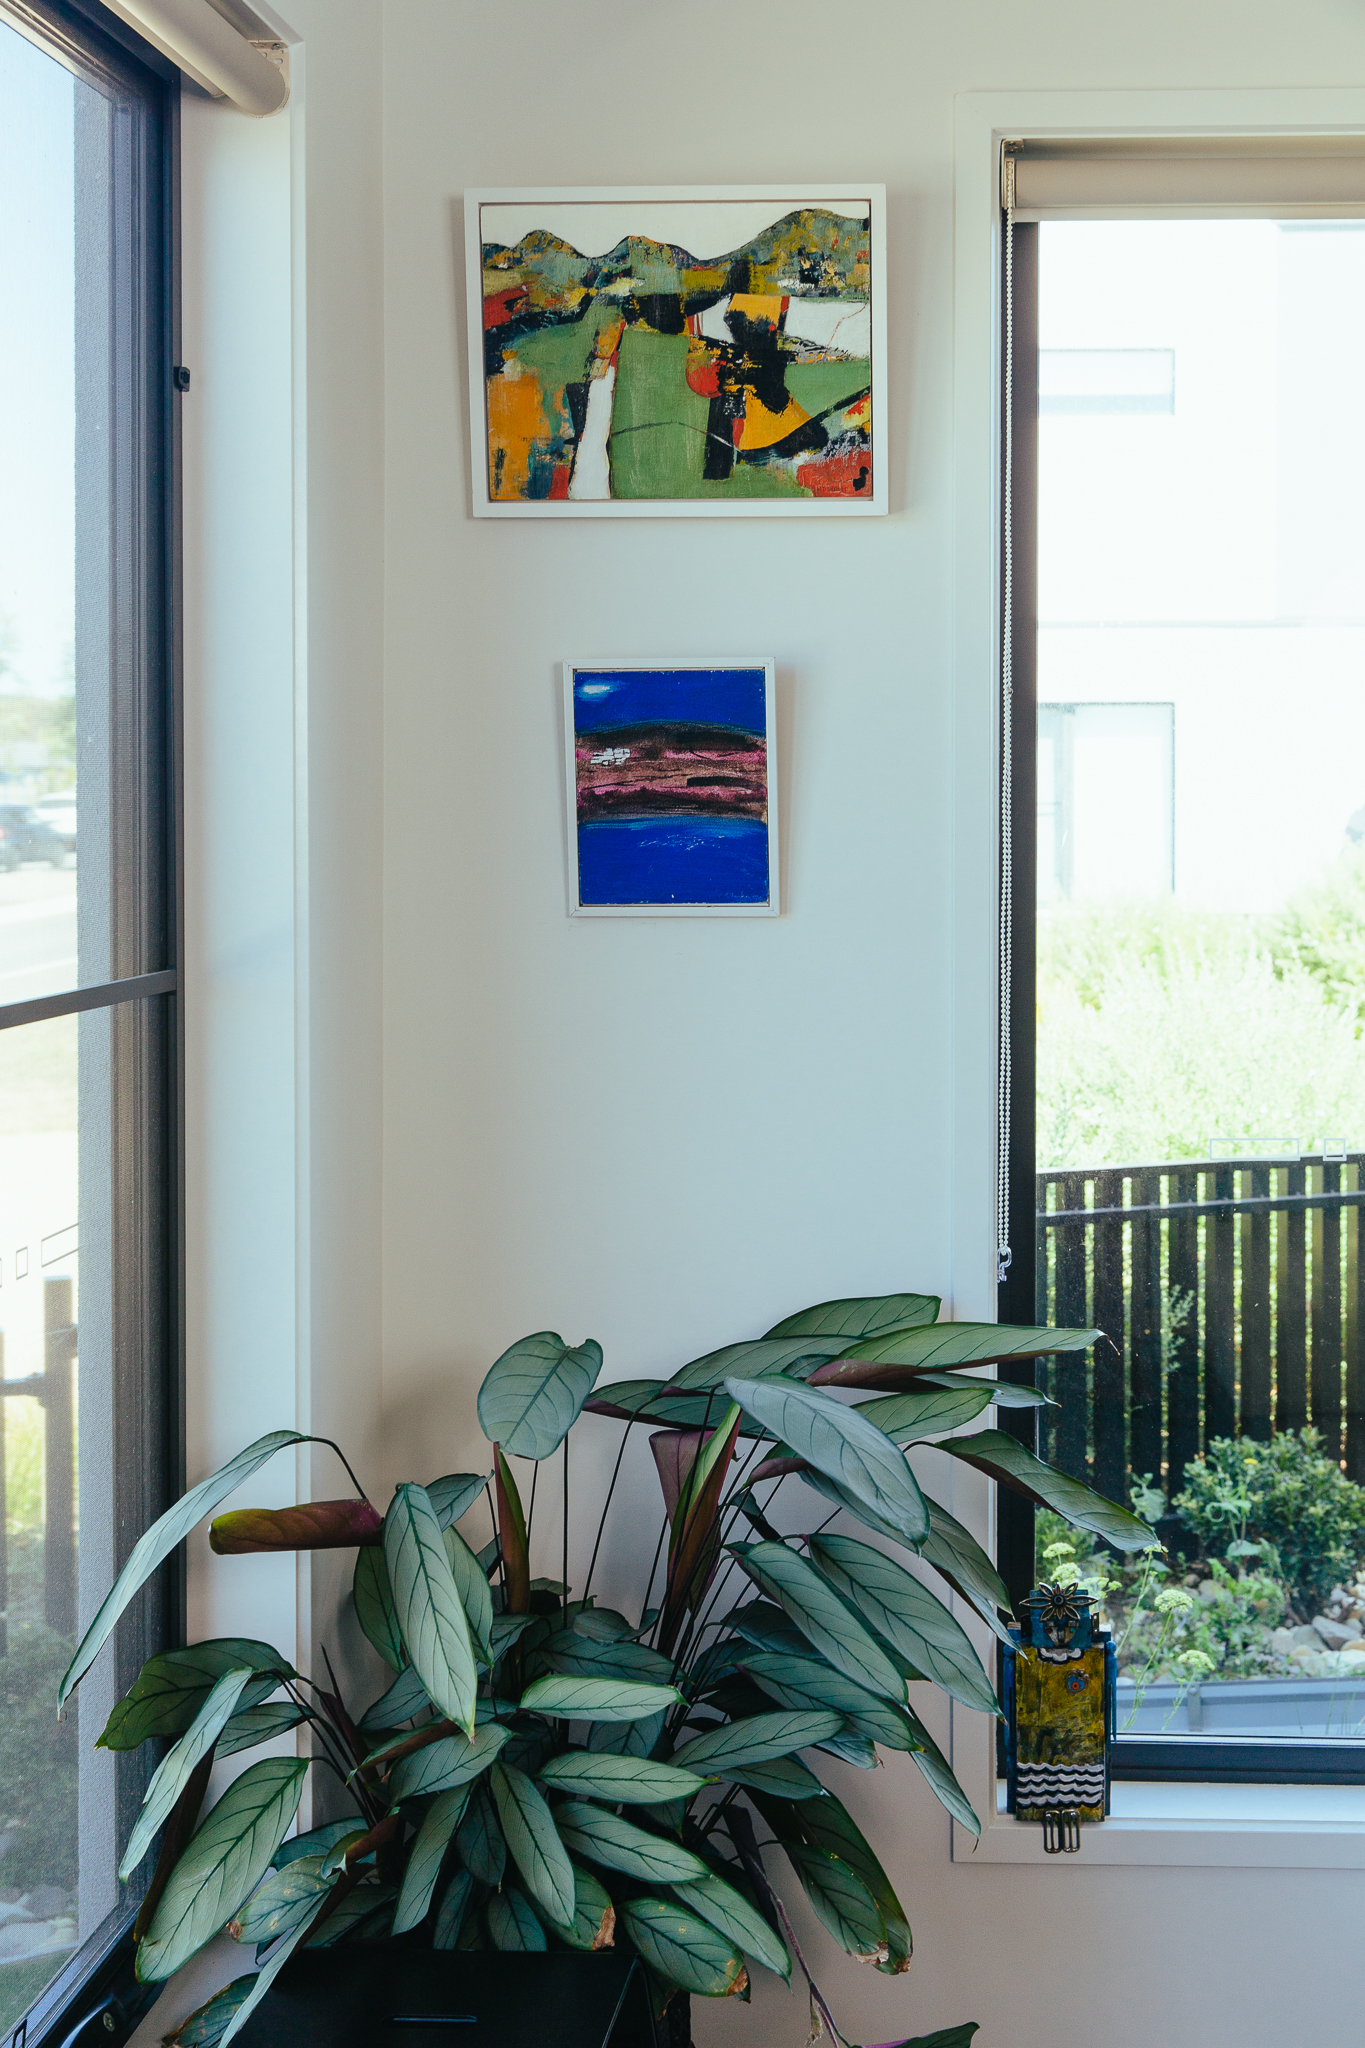 Two small artworks hung above a leafy plant